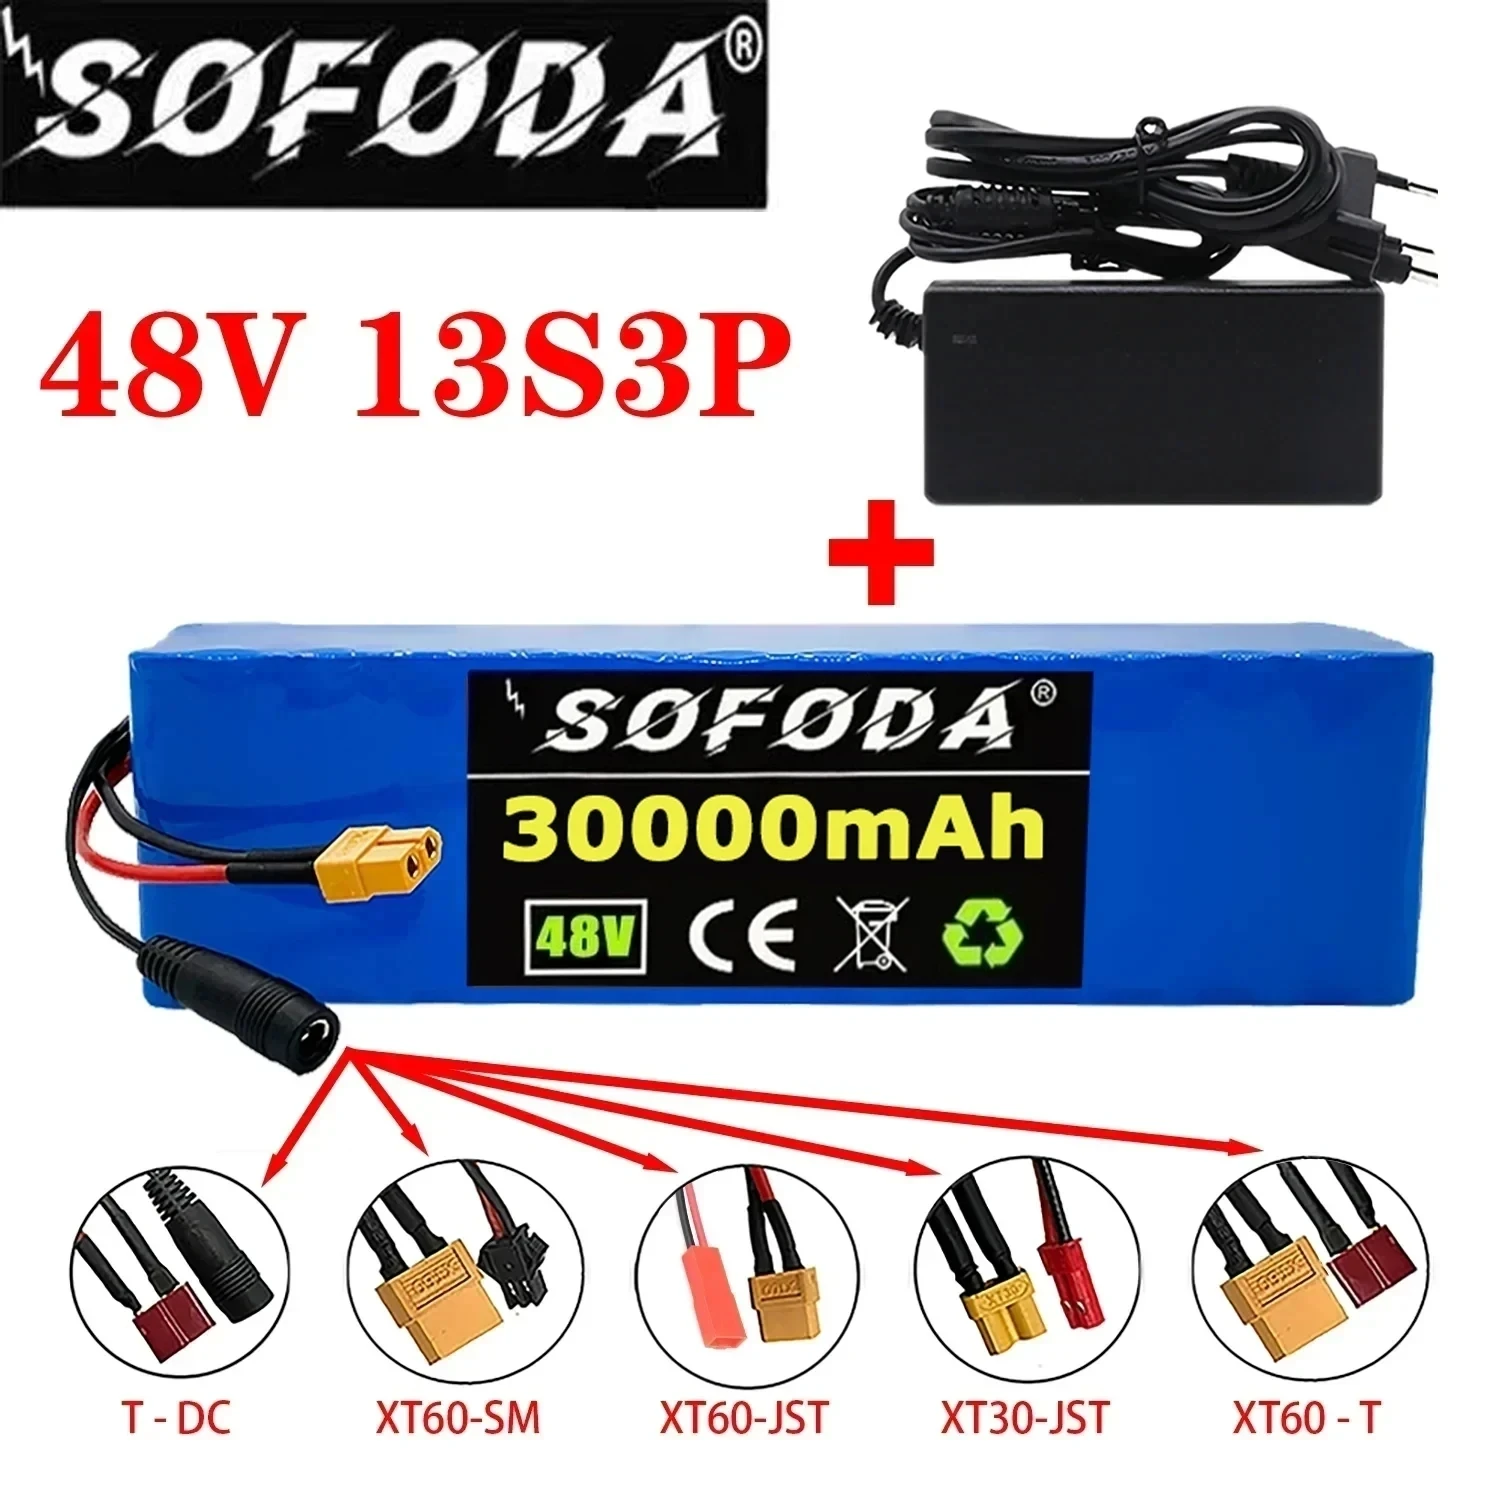 

13S3P 48V 30000mAh 30Ah Lithium-ion Battery Pack with 1000W BMS for 54.6V E-bike Electric Bicycle Scooter